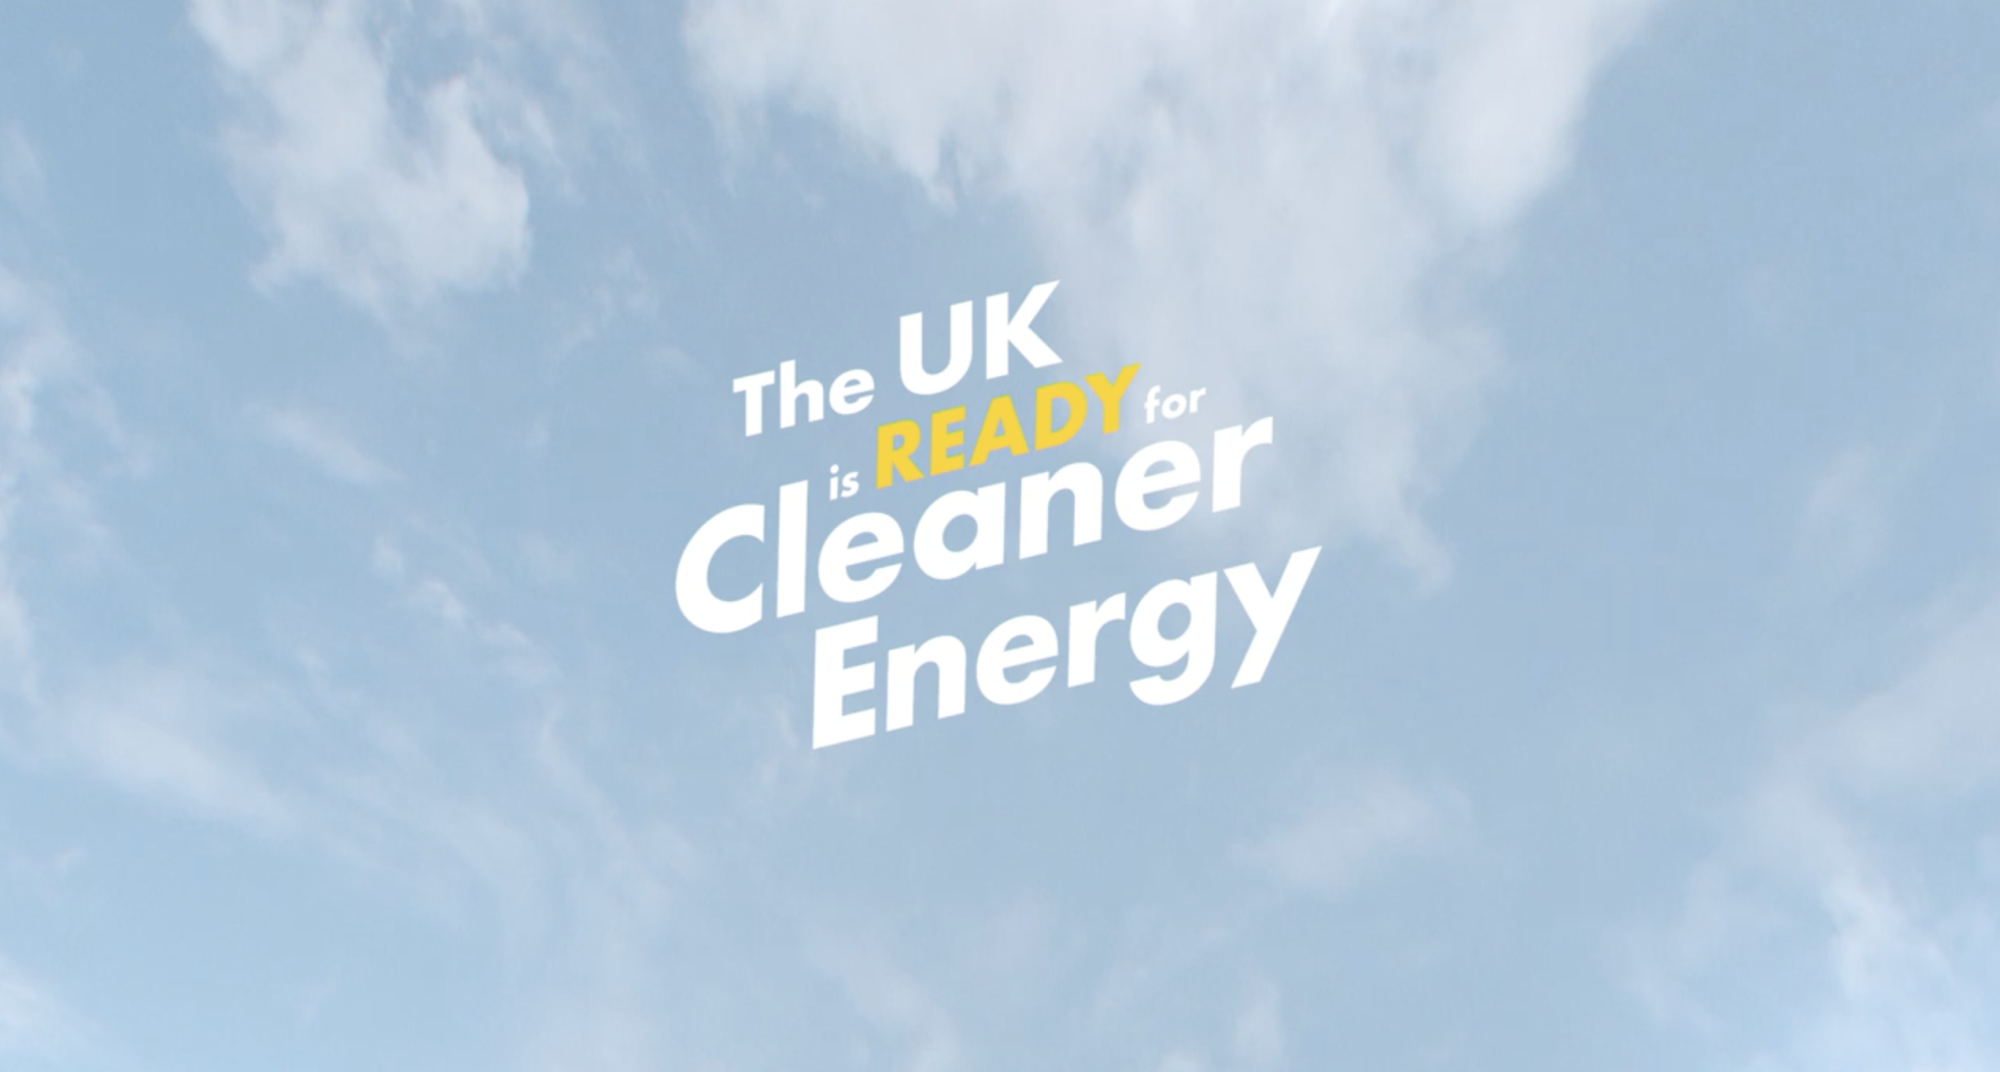 Among the ads&nbsp;banned by the UK’s advertising regulator is a Shell commercial that uses the phrase&nbsp;“cleaner energy.”